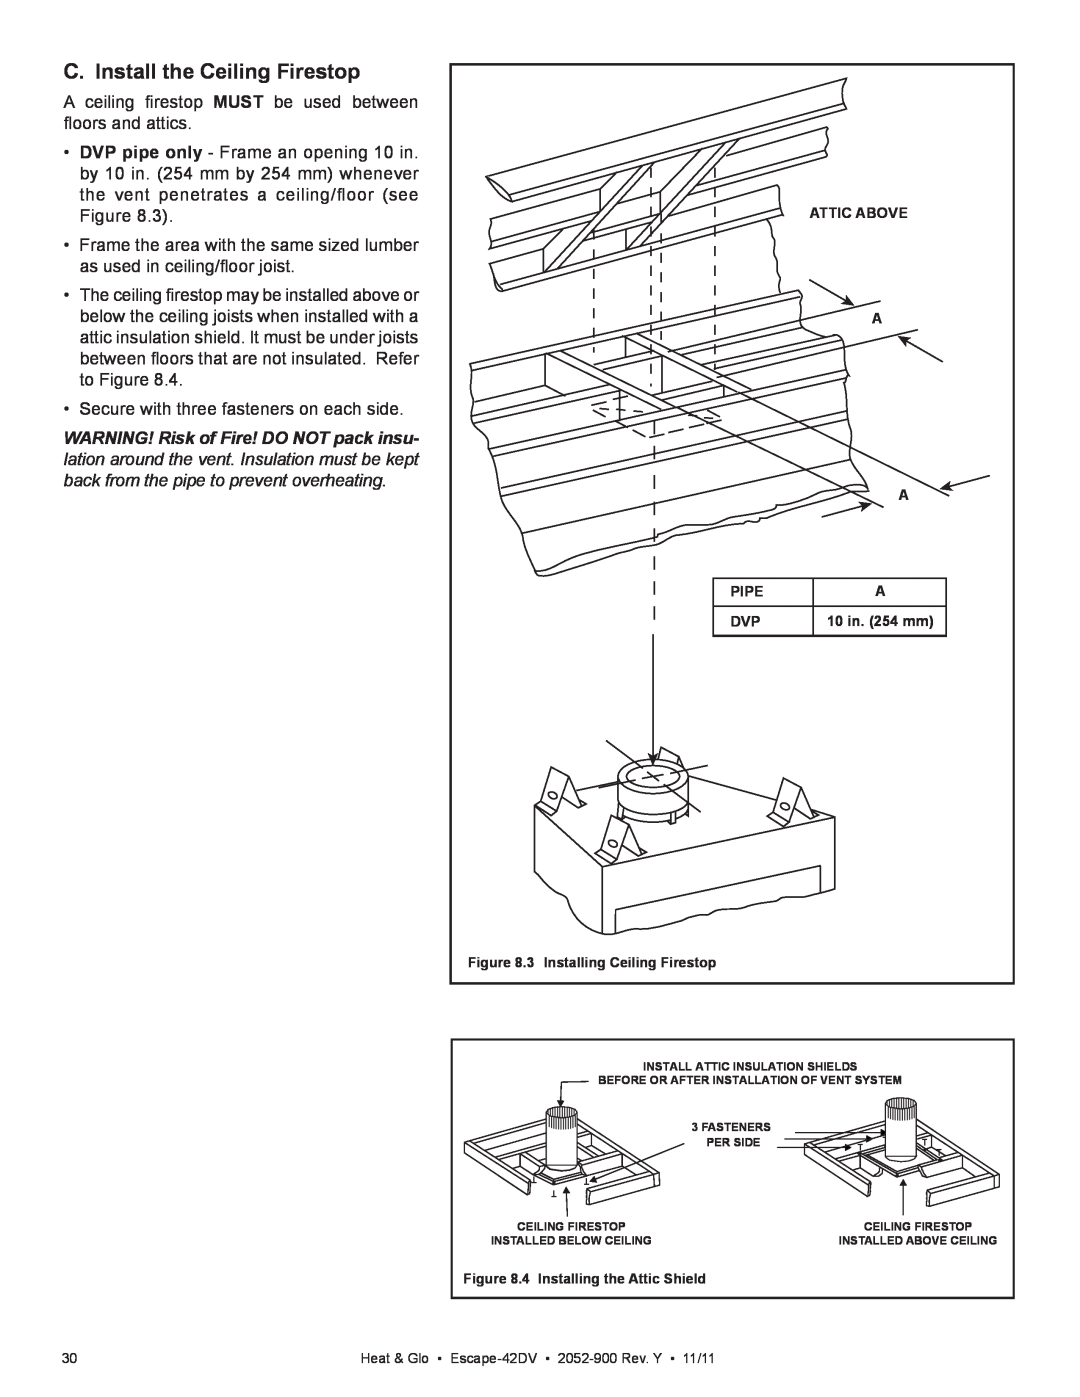 Heat & Glo LifeStyle Escape-42DVLP owner manual C. Install the Ceiling Firestop 